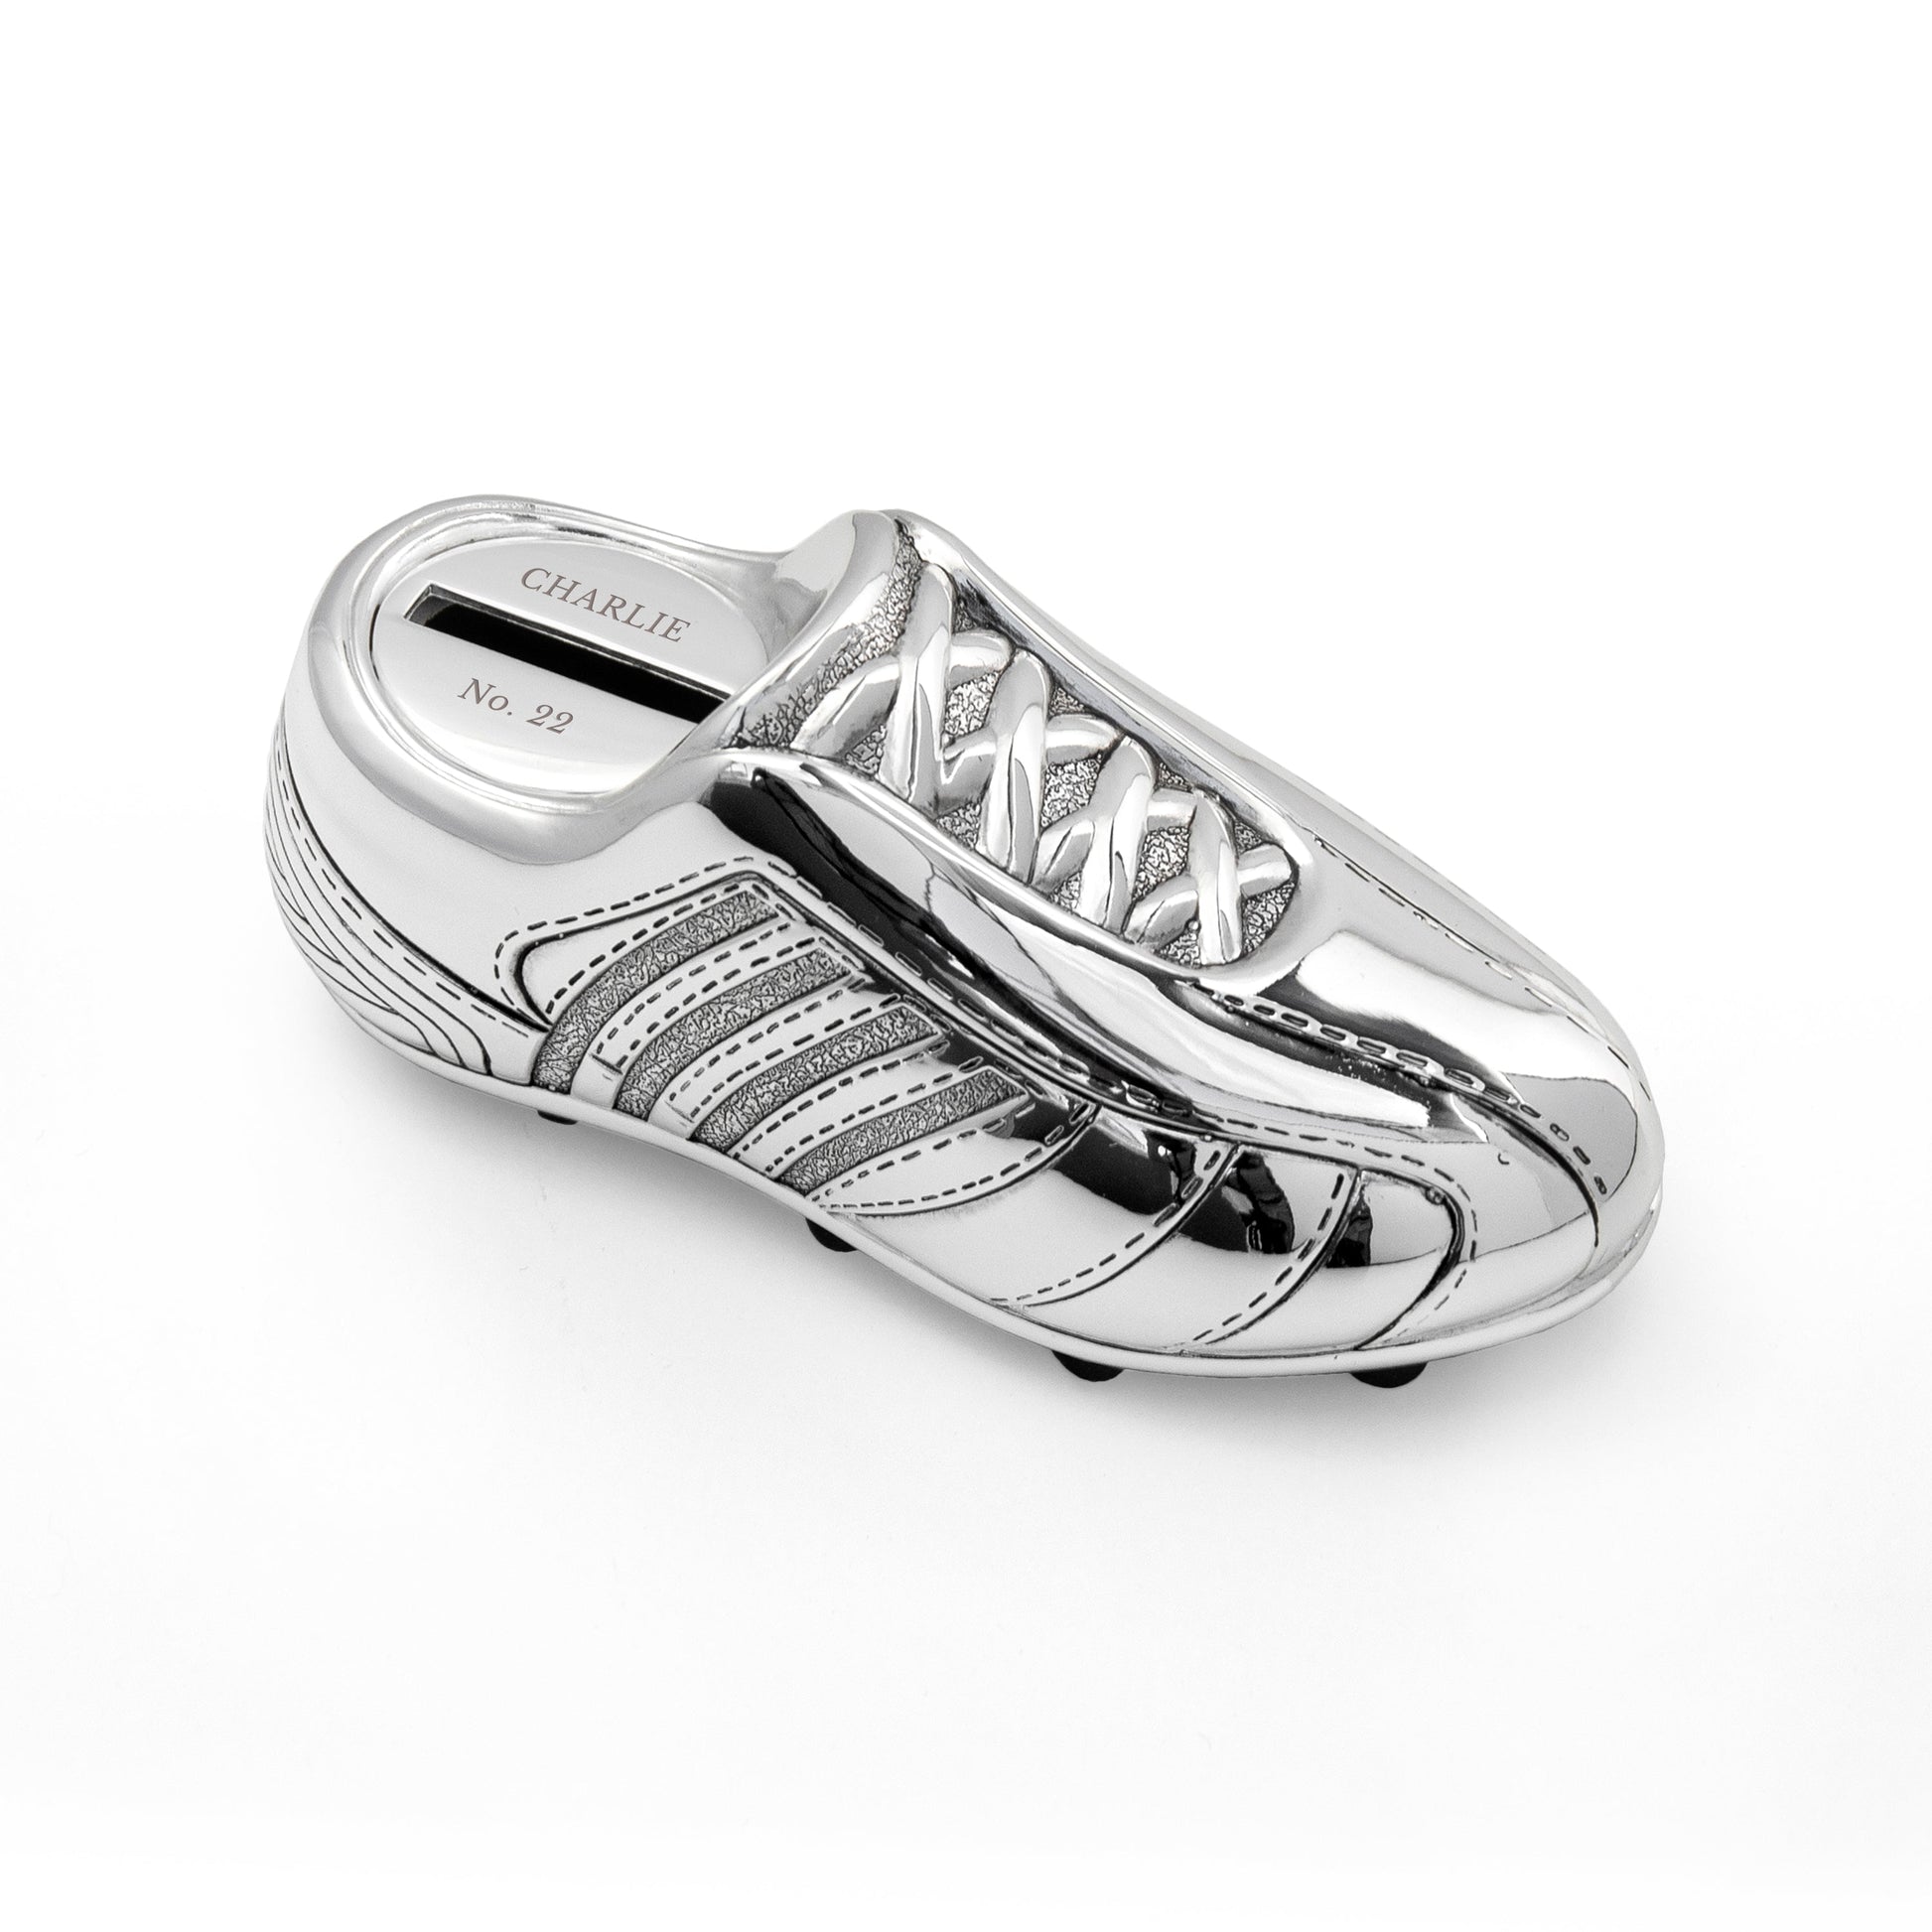 Personalized Money Boxes - Personalized Silver Plated Football Boot Money Box 